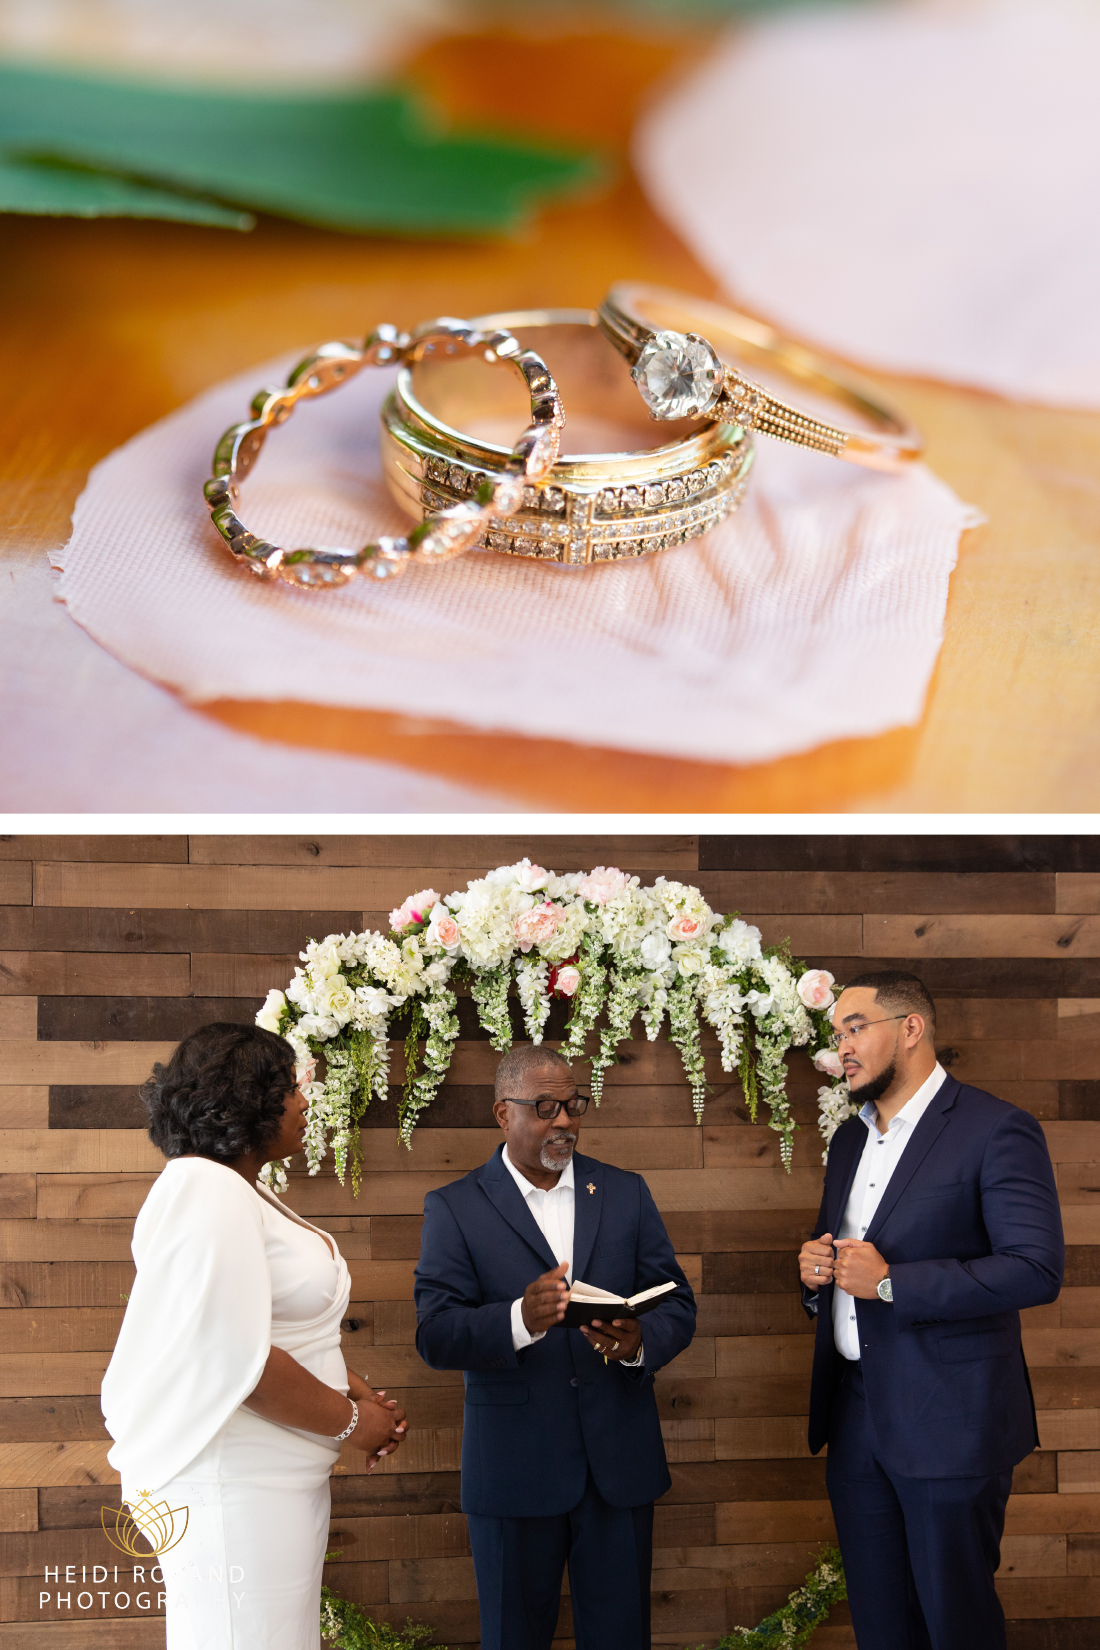 wedding rings and ceremony at Old City Social in Philadelphia